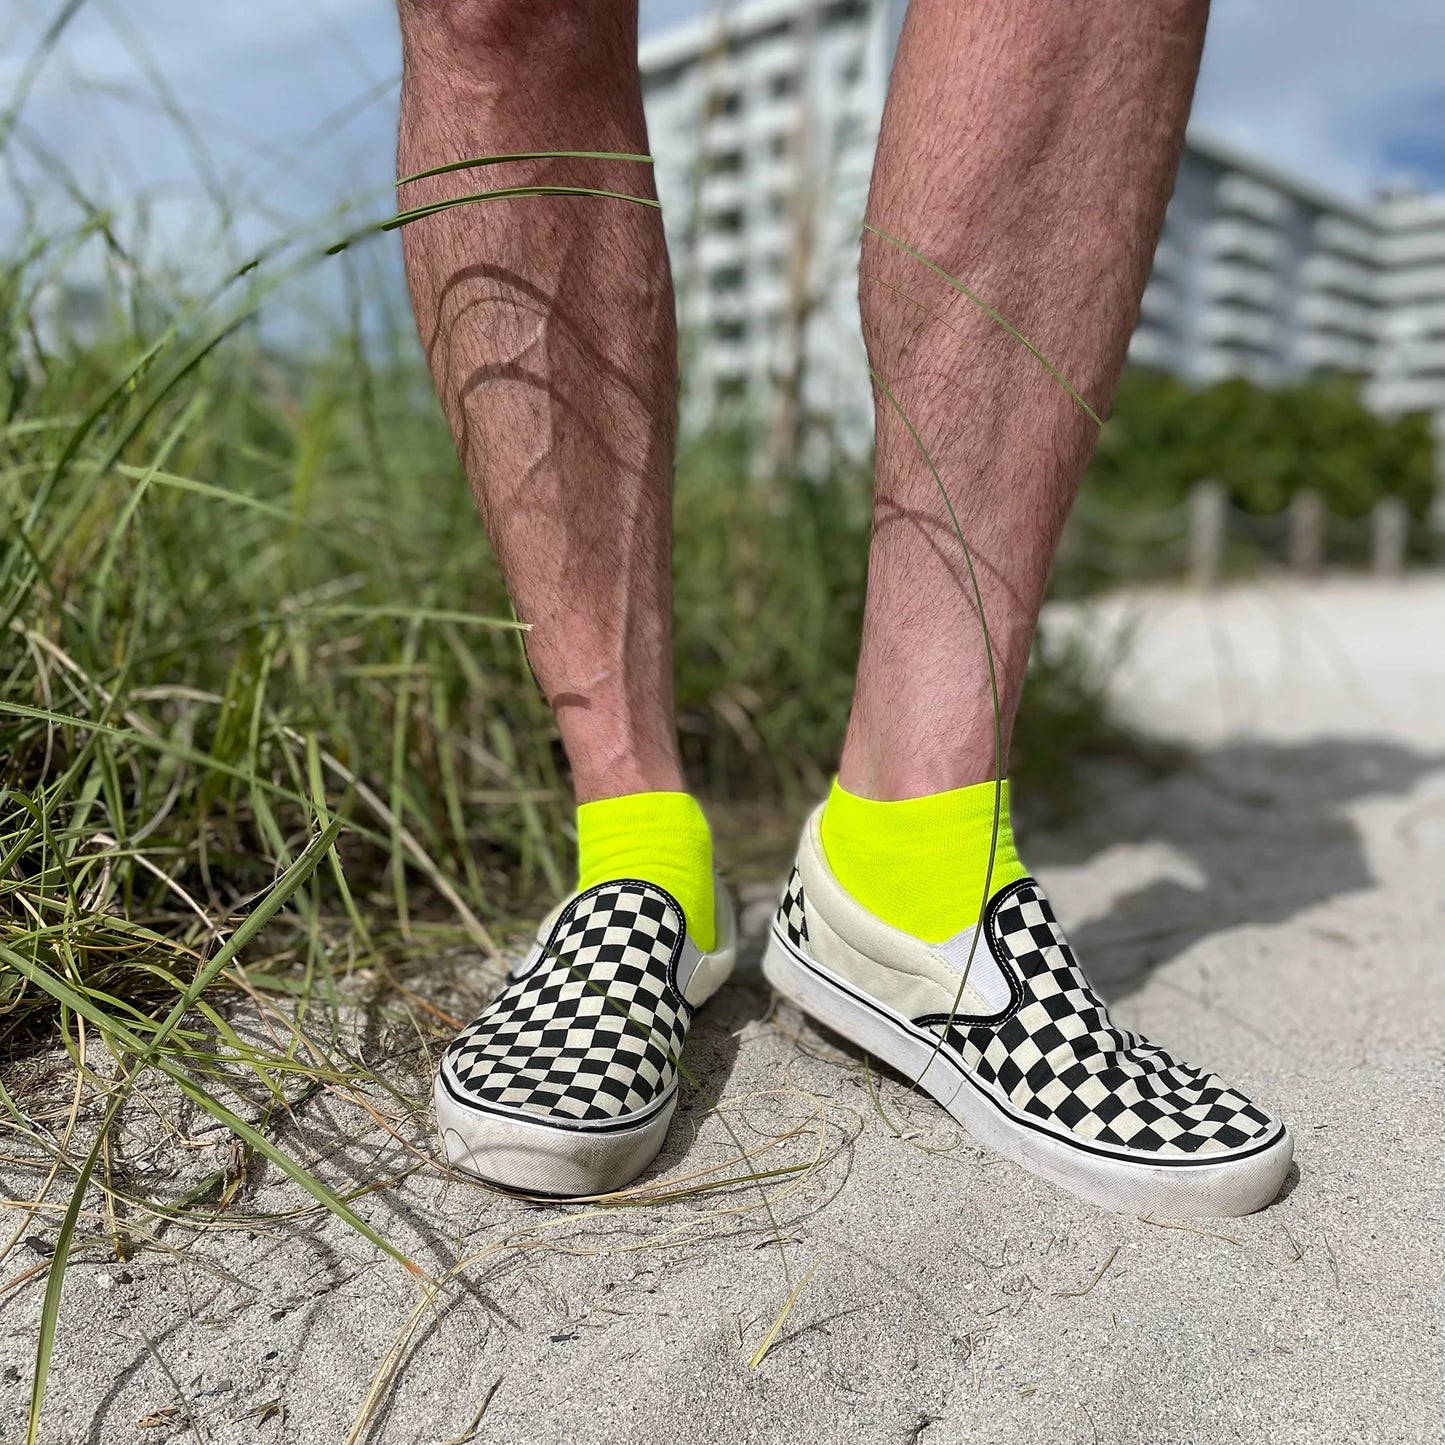 man standing on a beach wearing checkerboard Vans and bright yellow DeFeet All Day cycling socks with a 1" cuff